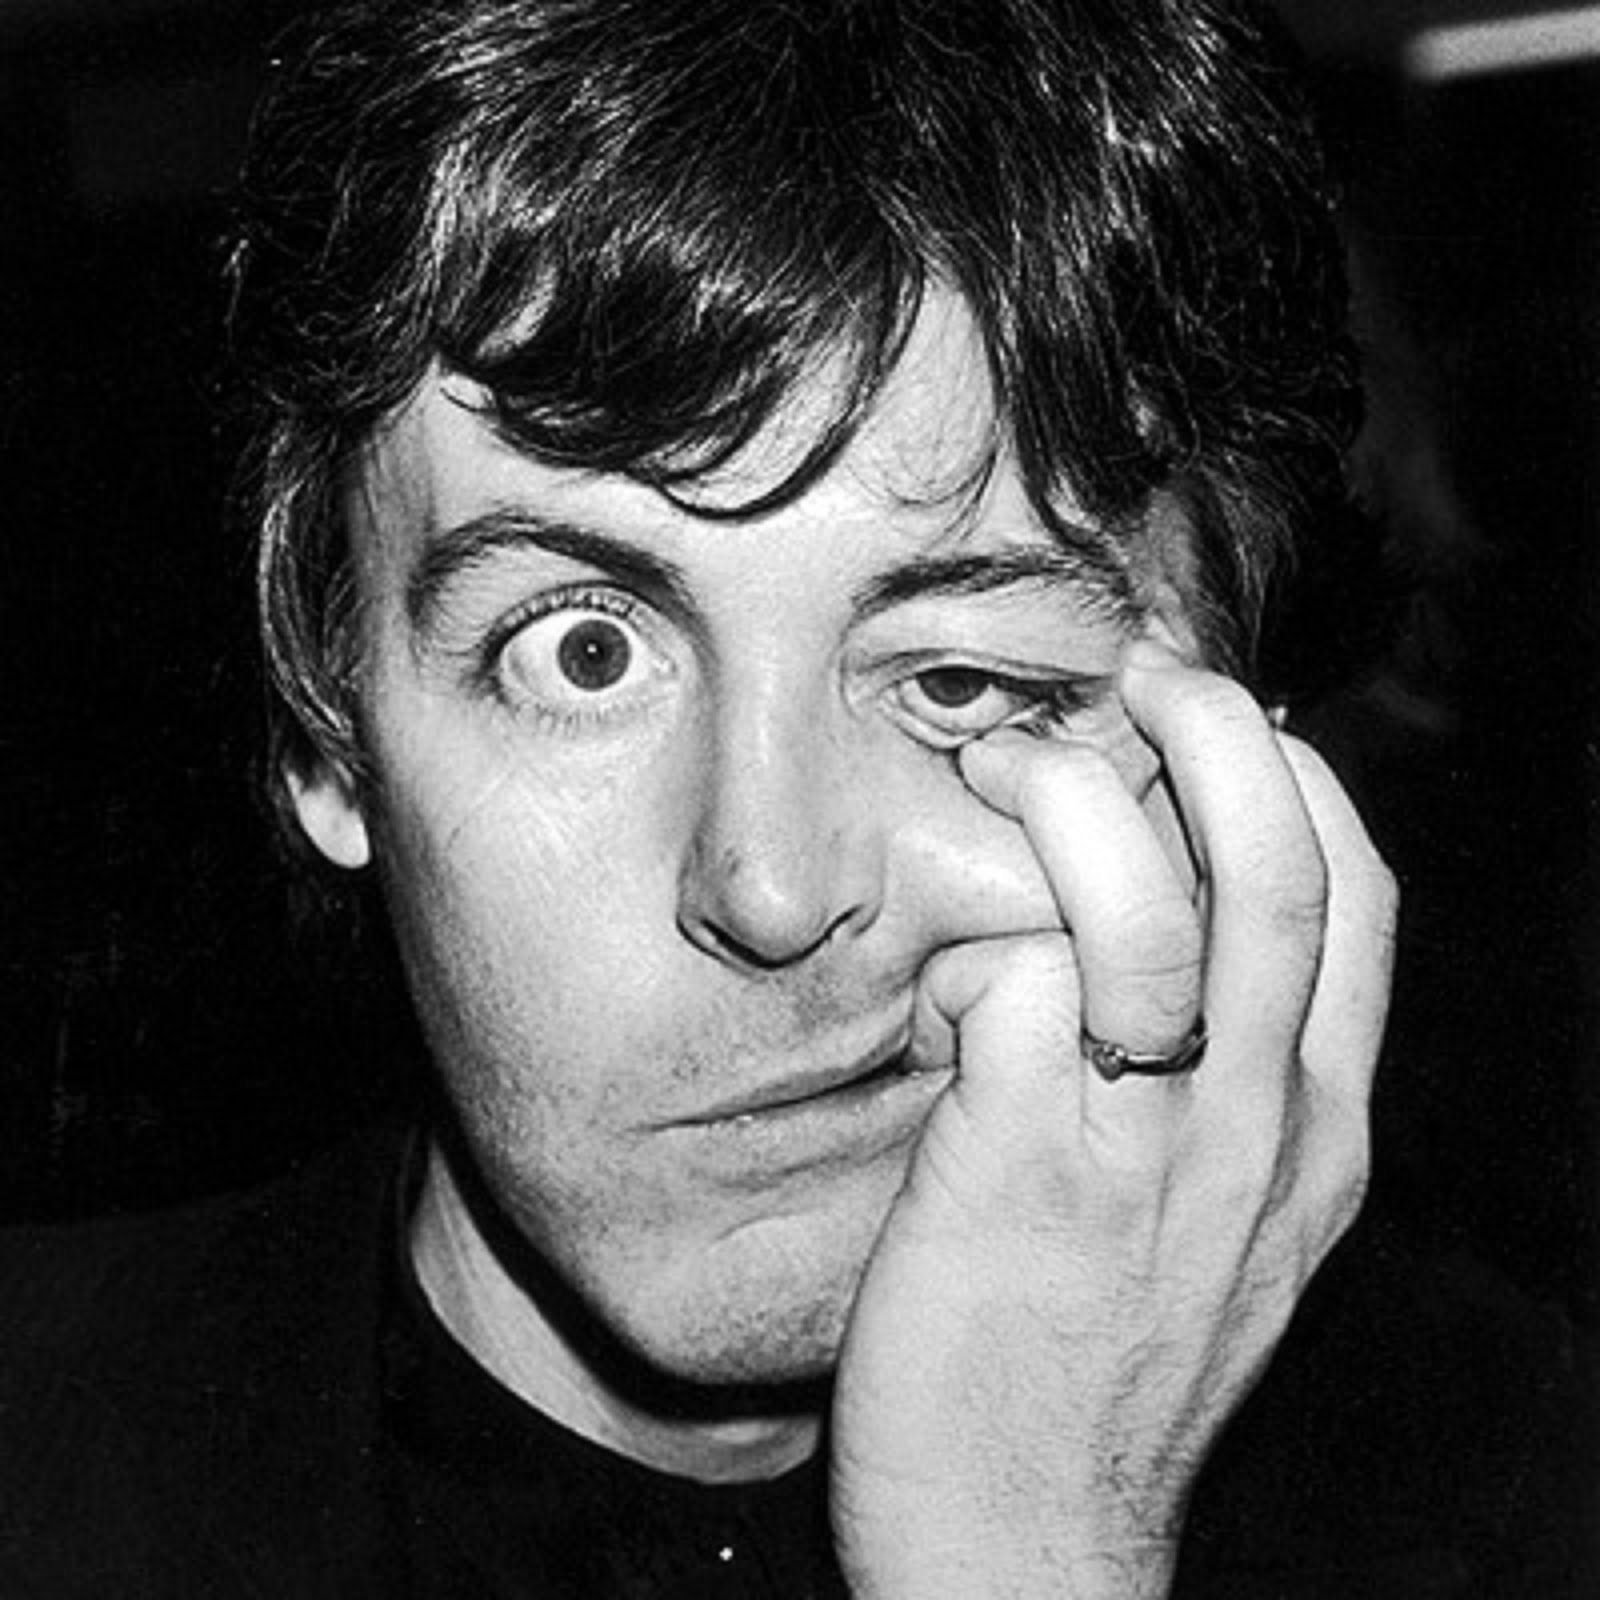 PAUL McCARTNEY - "A SPACESHIP CAME AND JERKED ME OUT OF ME MORAL PATH"